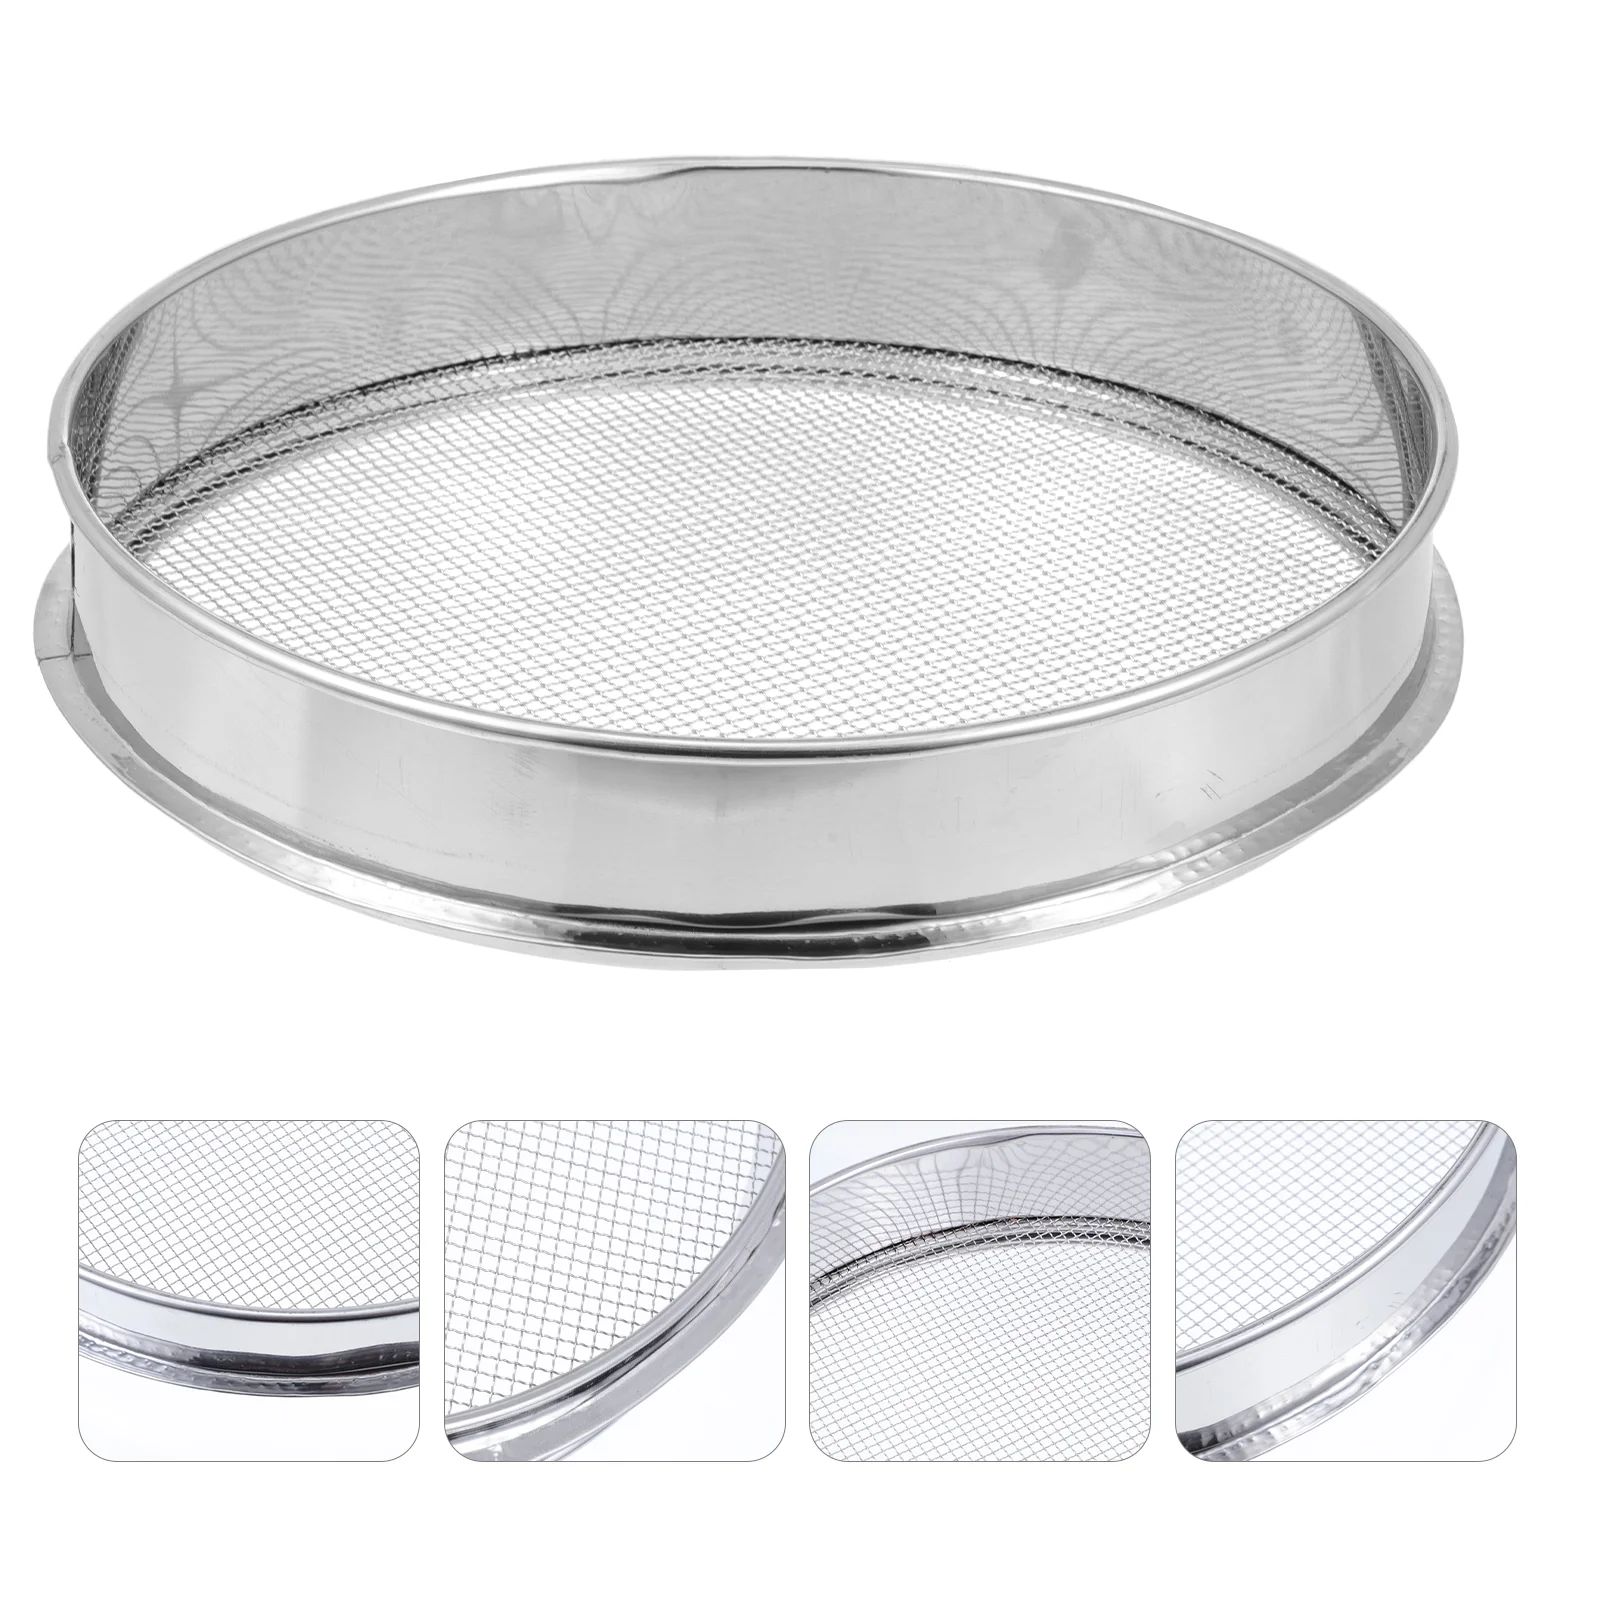 

Screen Handheld Grains Strainer Tea Filters Sifter Kitchen Tool Beans Stainless Steel Colander Mesh Cereal Sifting Corn